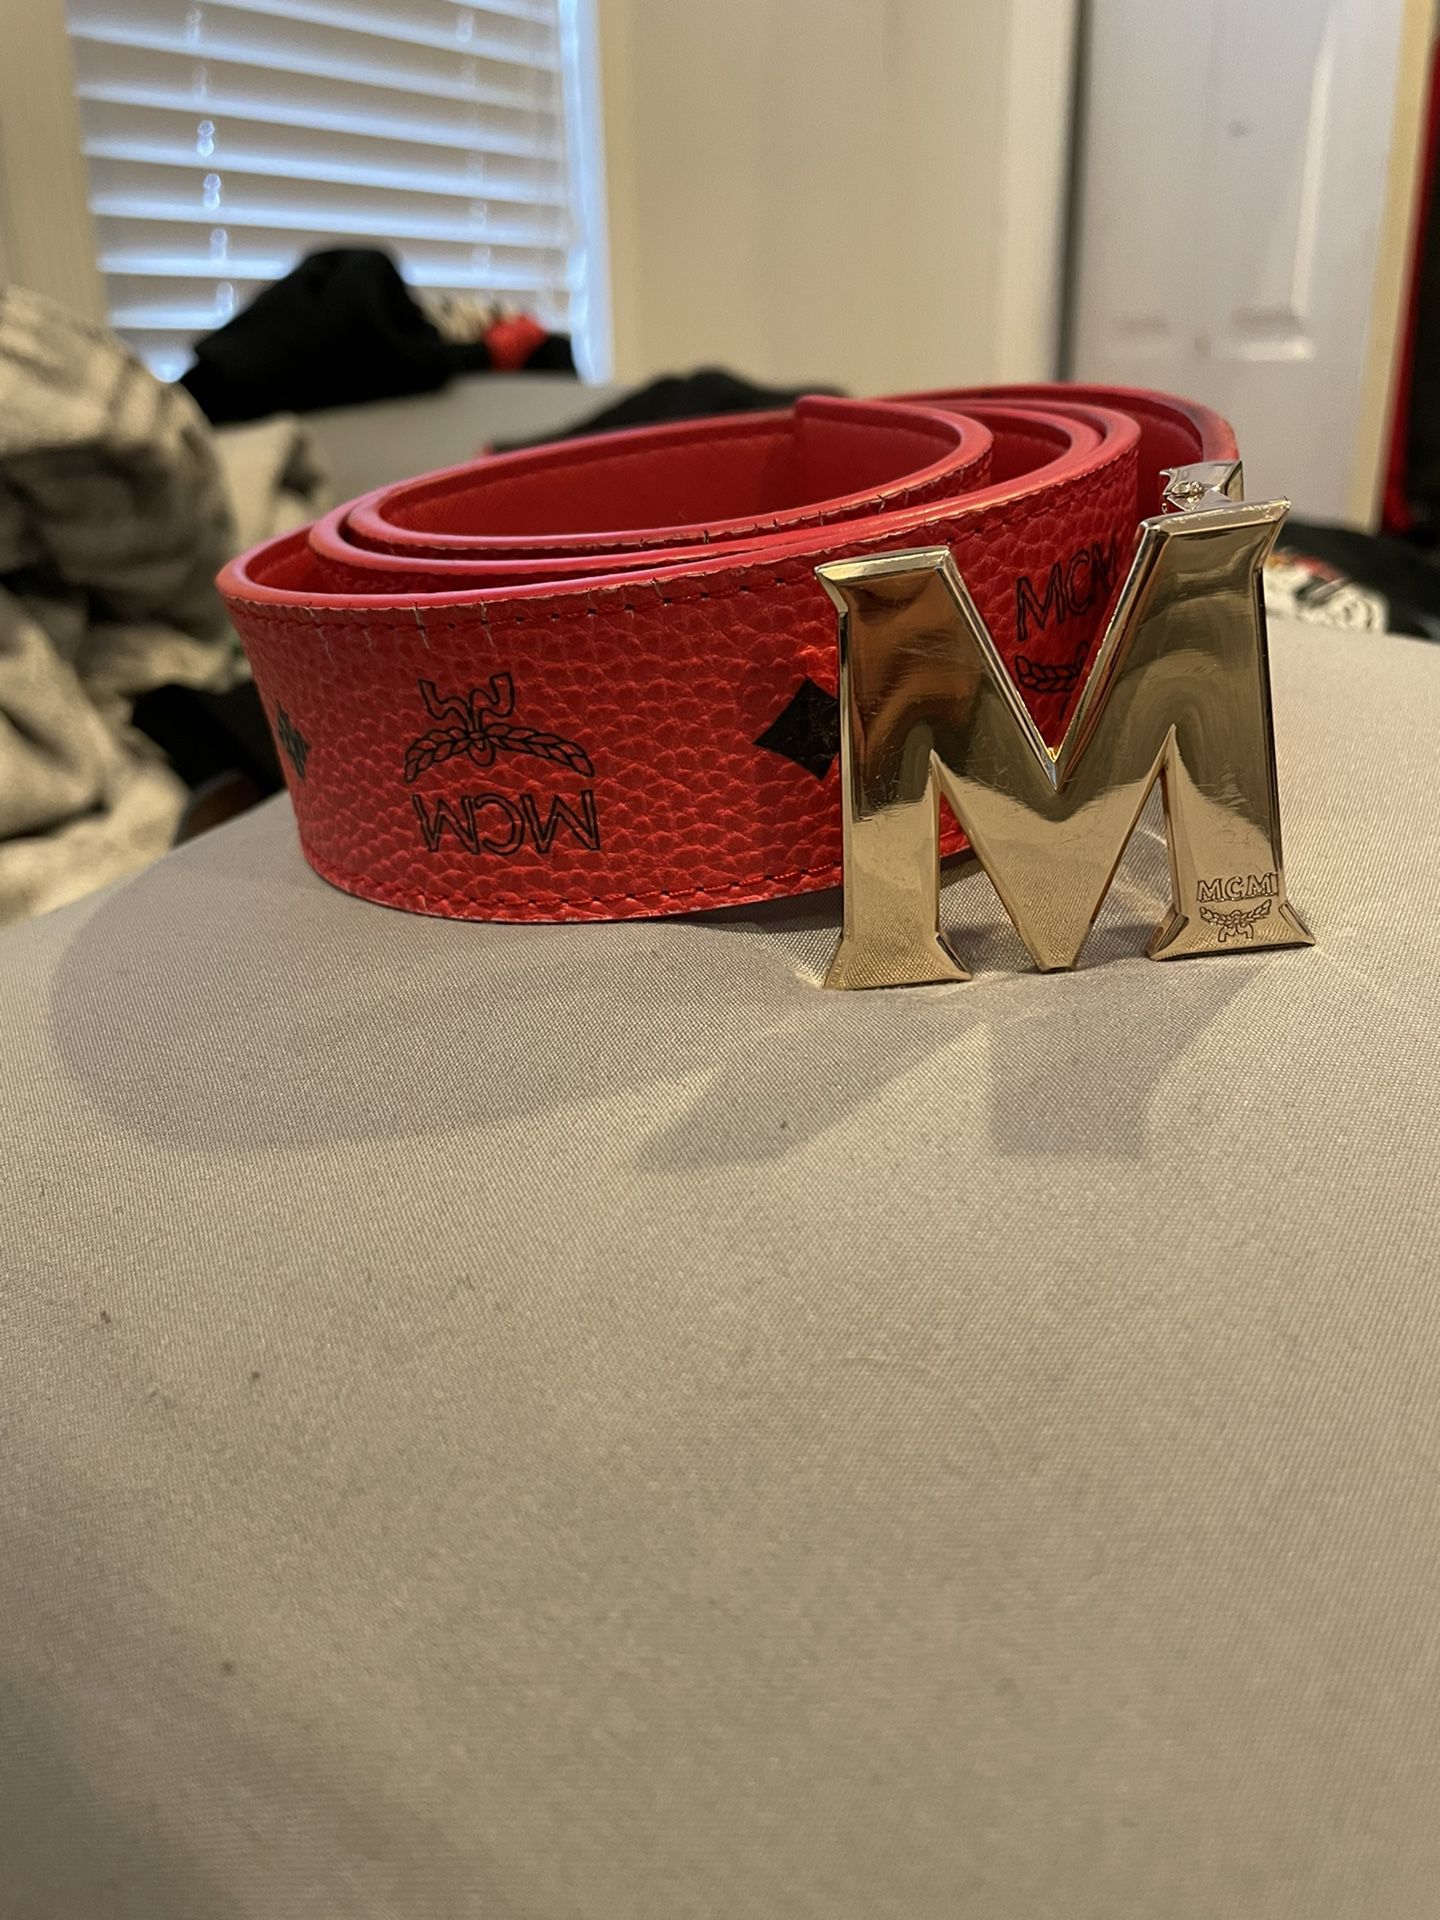 Hermès belt with authenticity card for Sale in Cromwell, CT - OfferUp